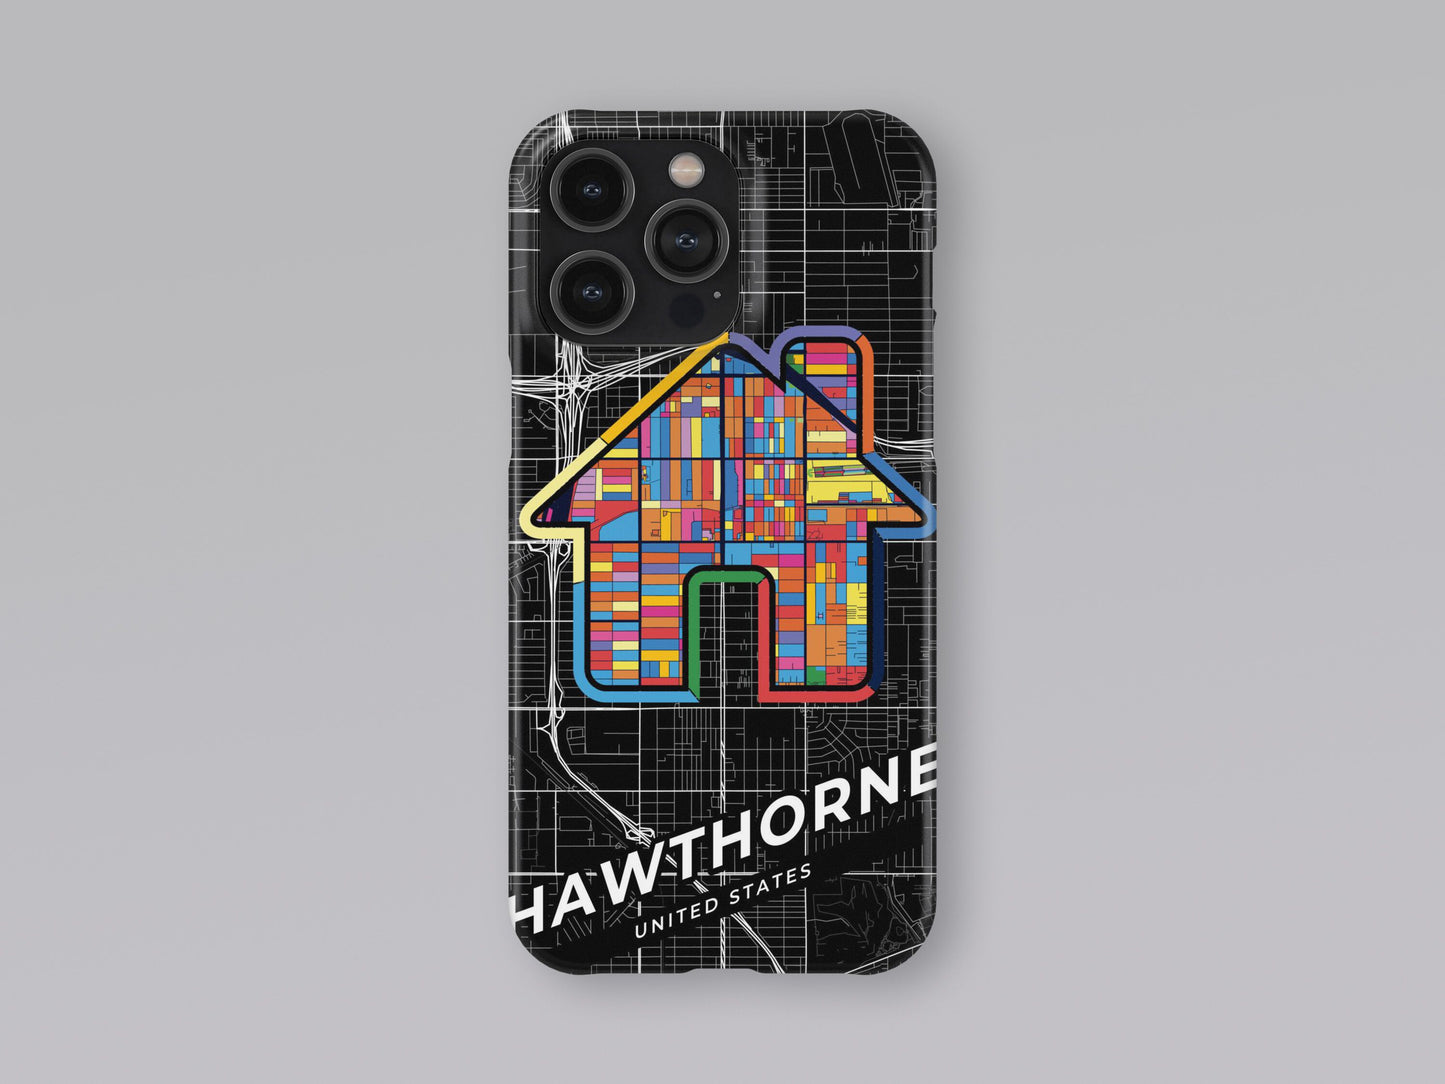 Hawthorne California slim phone case with colorful icon. Birthday, wedding or housewarming gift. Couple match cases. 3